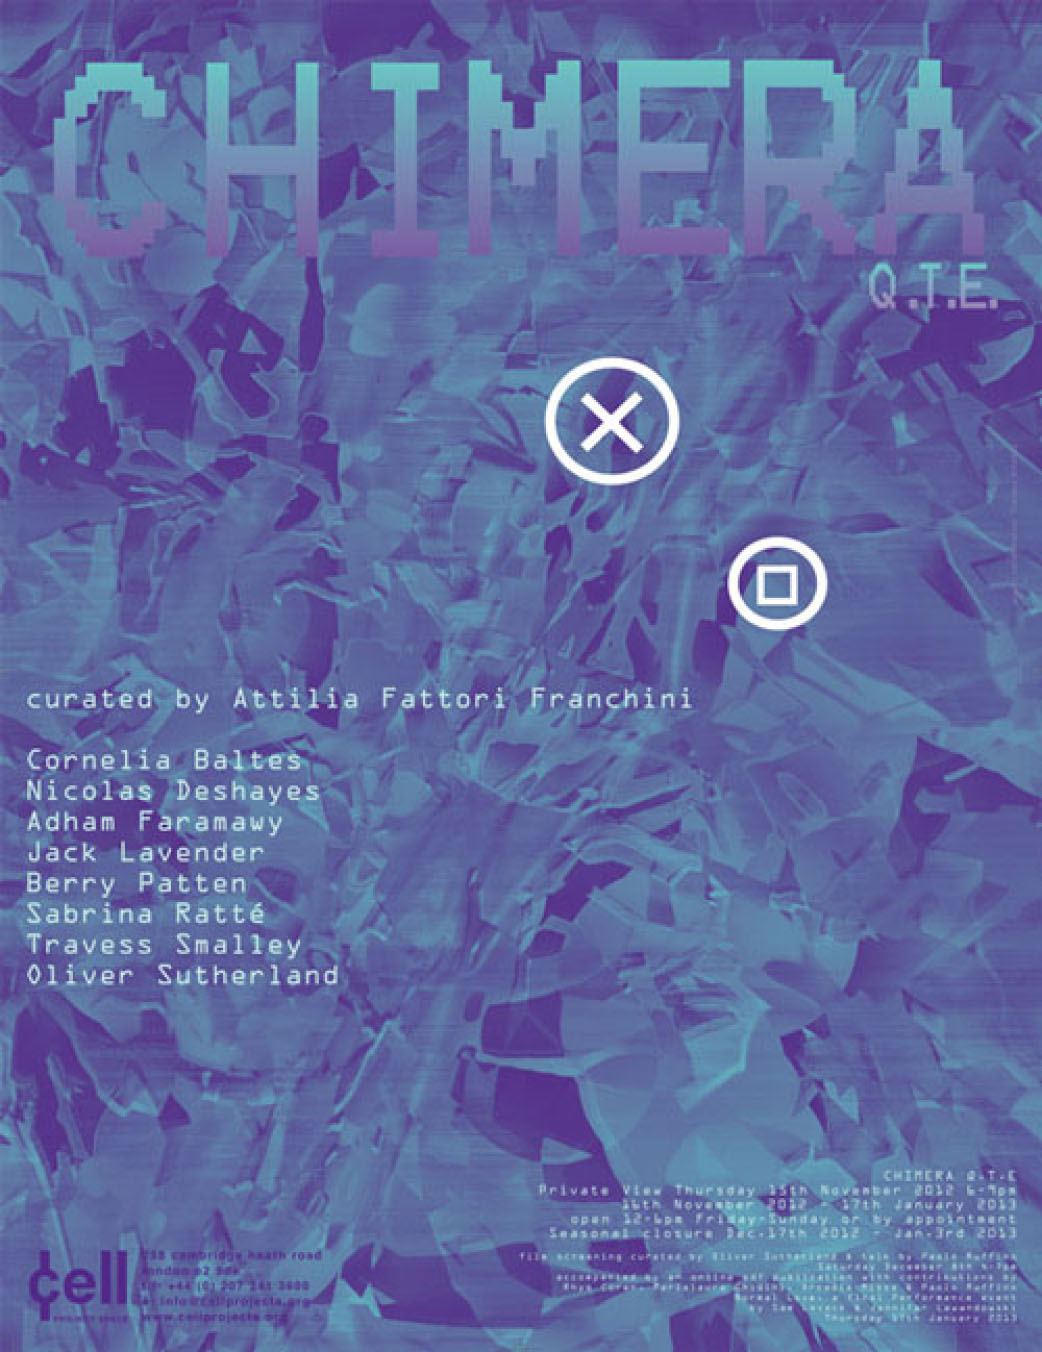 Chimera Q.T.E Poster, Cell Project Space 2010